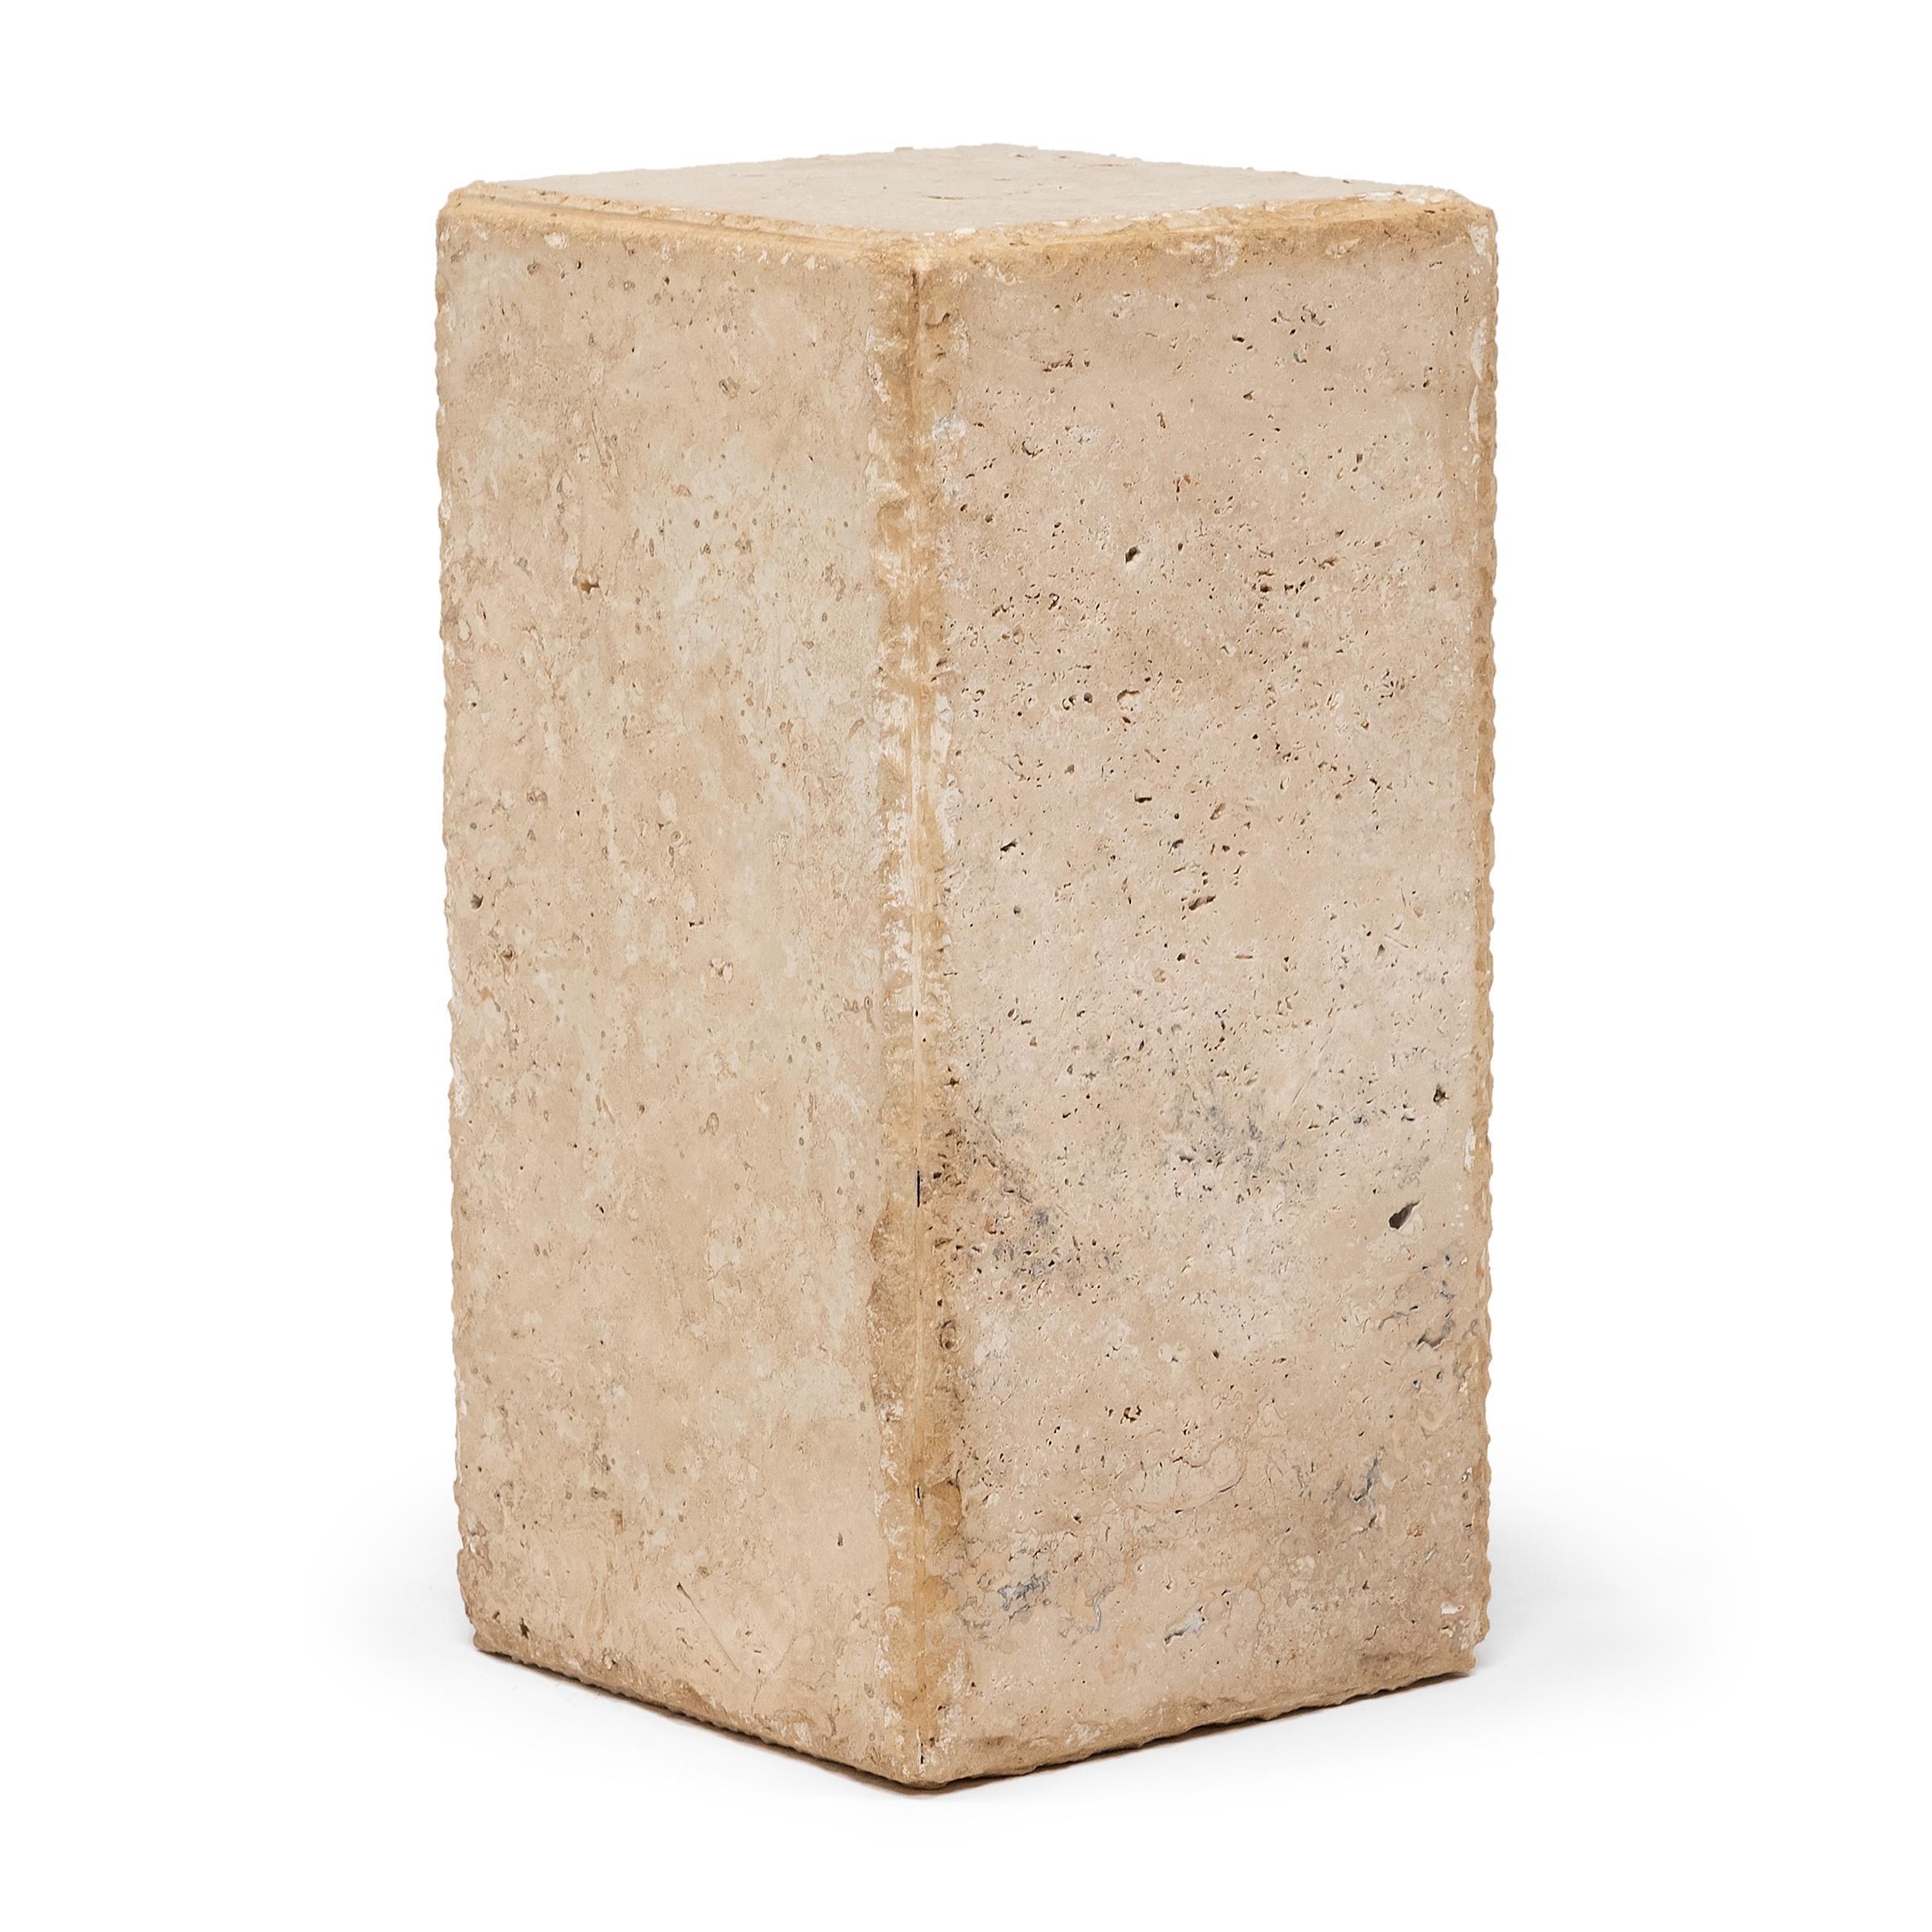 This minimalist block-form pedestal is hand-carved of solid travertine marble by a local Chicago artisan. Shaped with clean lines and balanced proportions, the narrow display stand exemplifies Organic Modern style with chiseled edges, smoothed sides